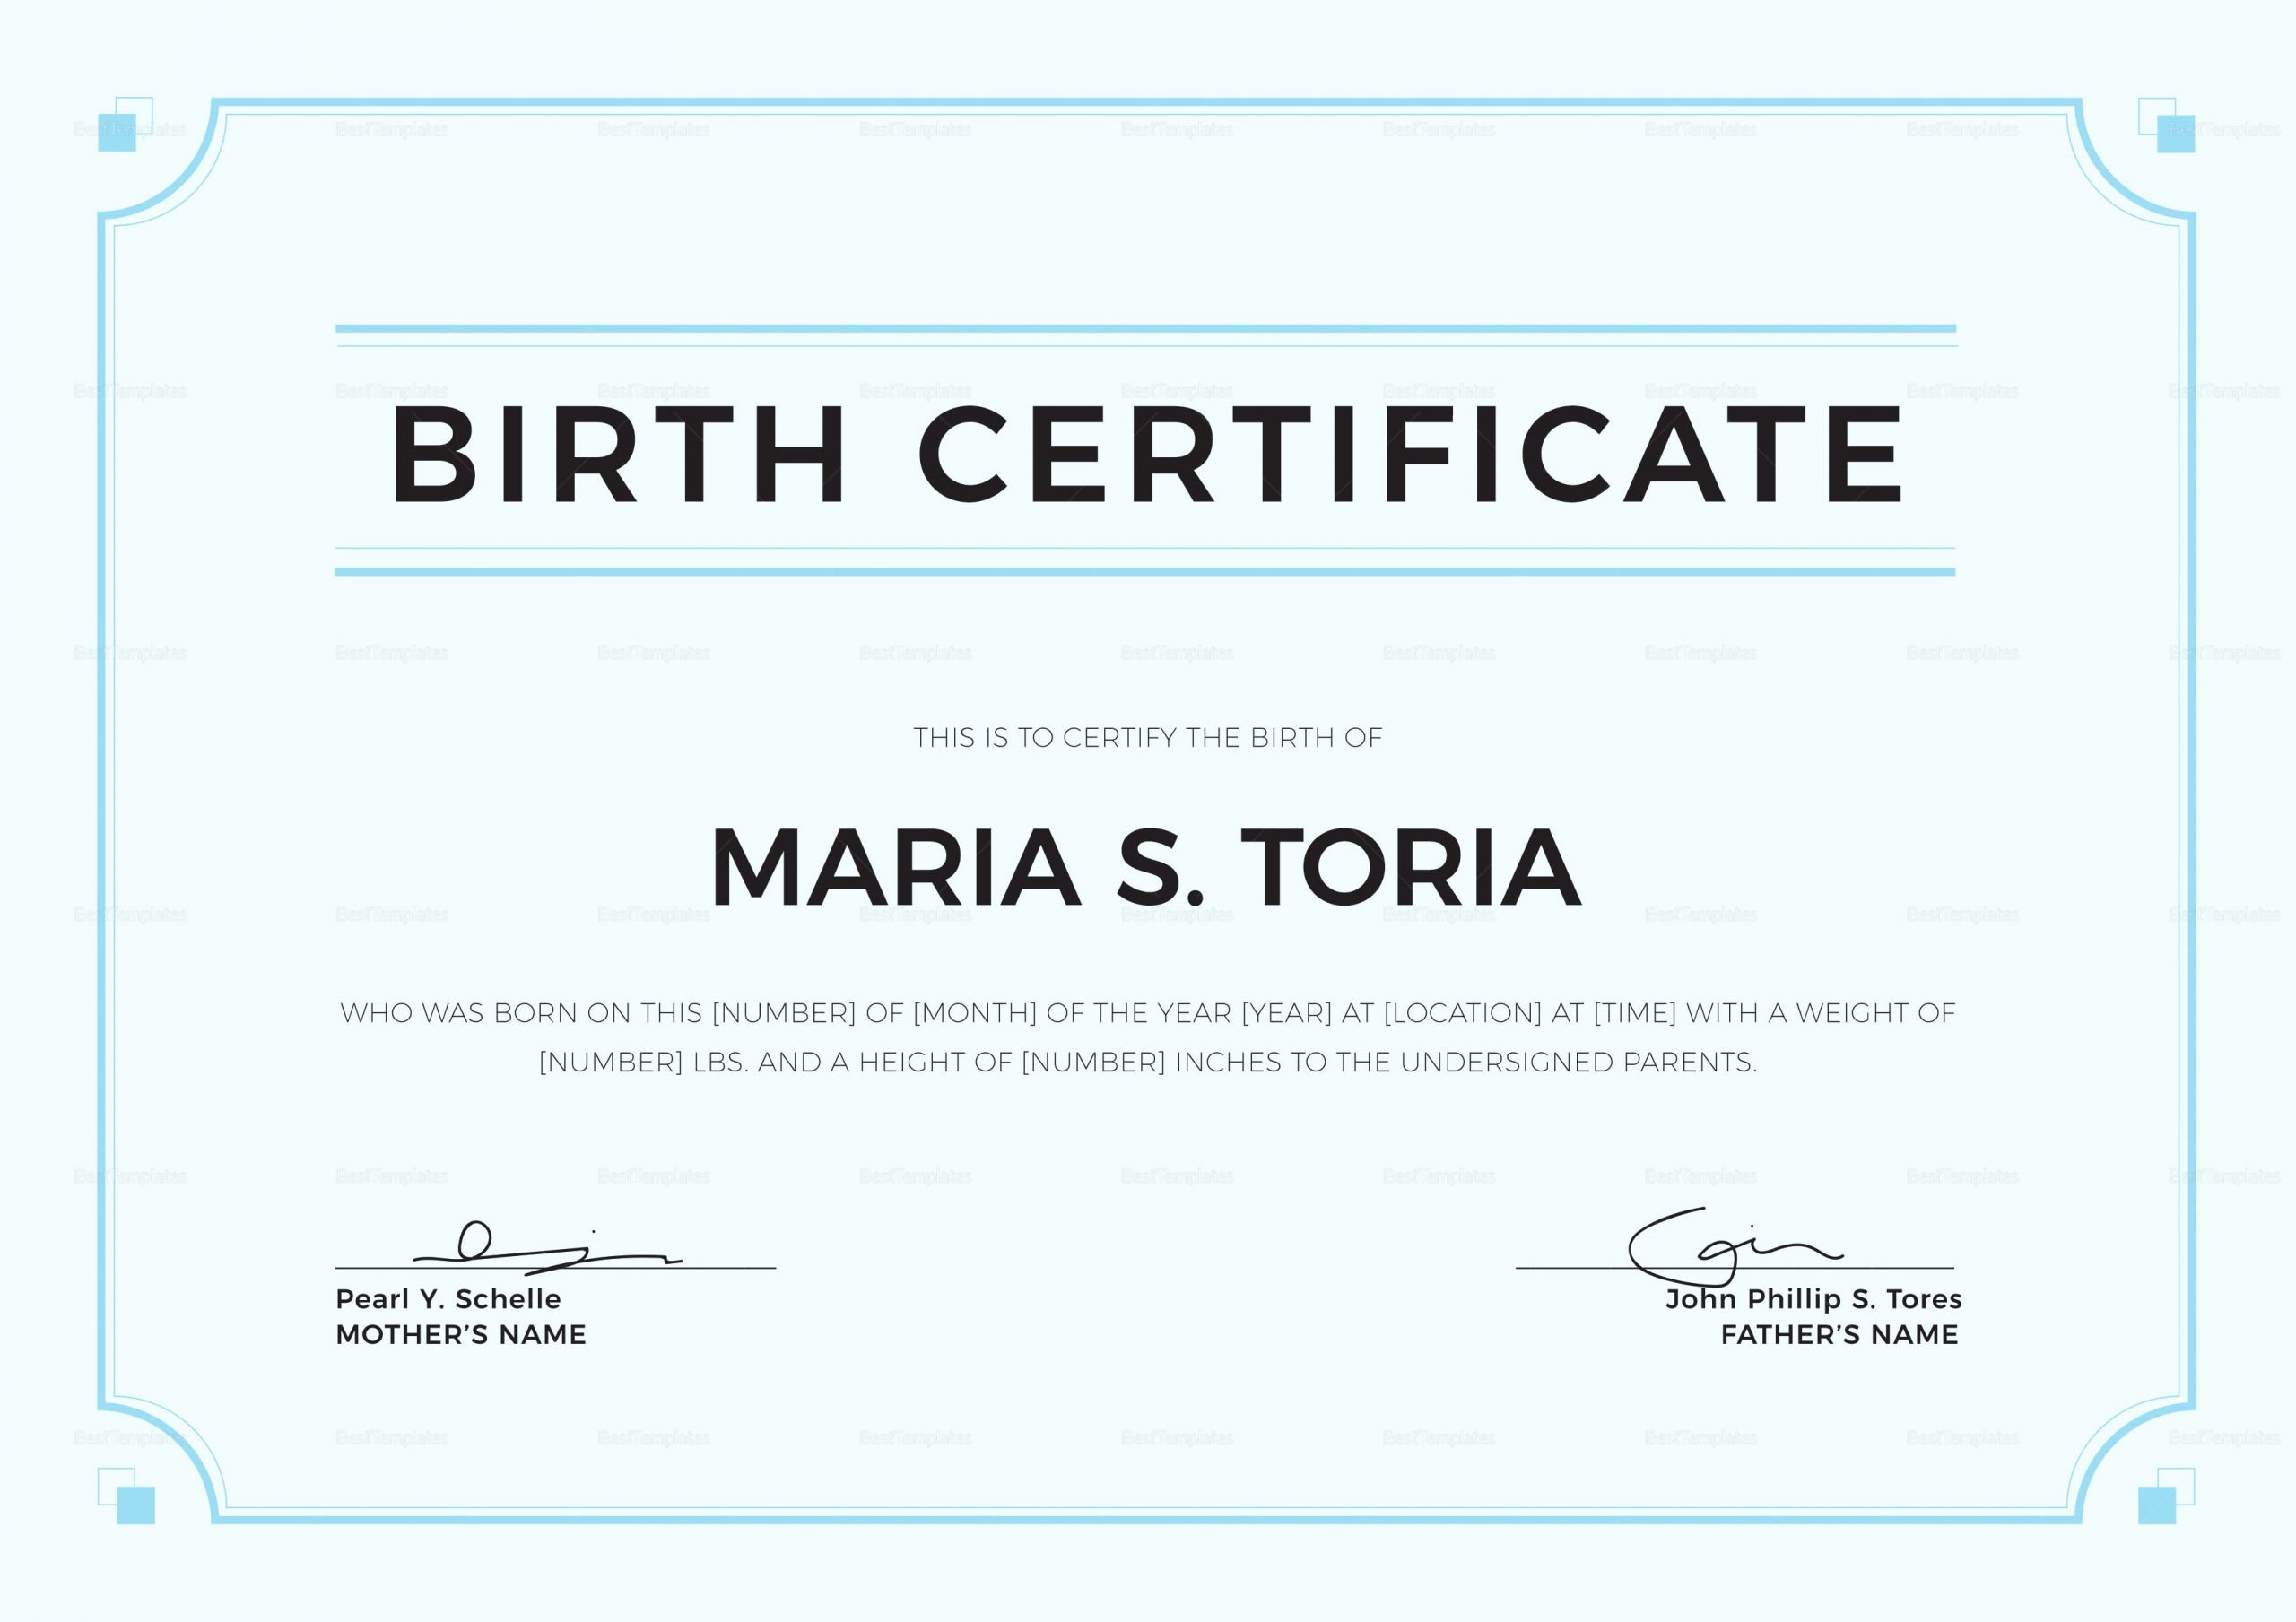 Blank Birth Certificate form New Blank Birth Certificate Design Template In Psd Word